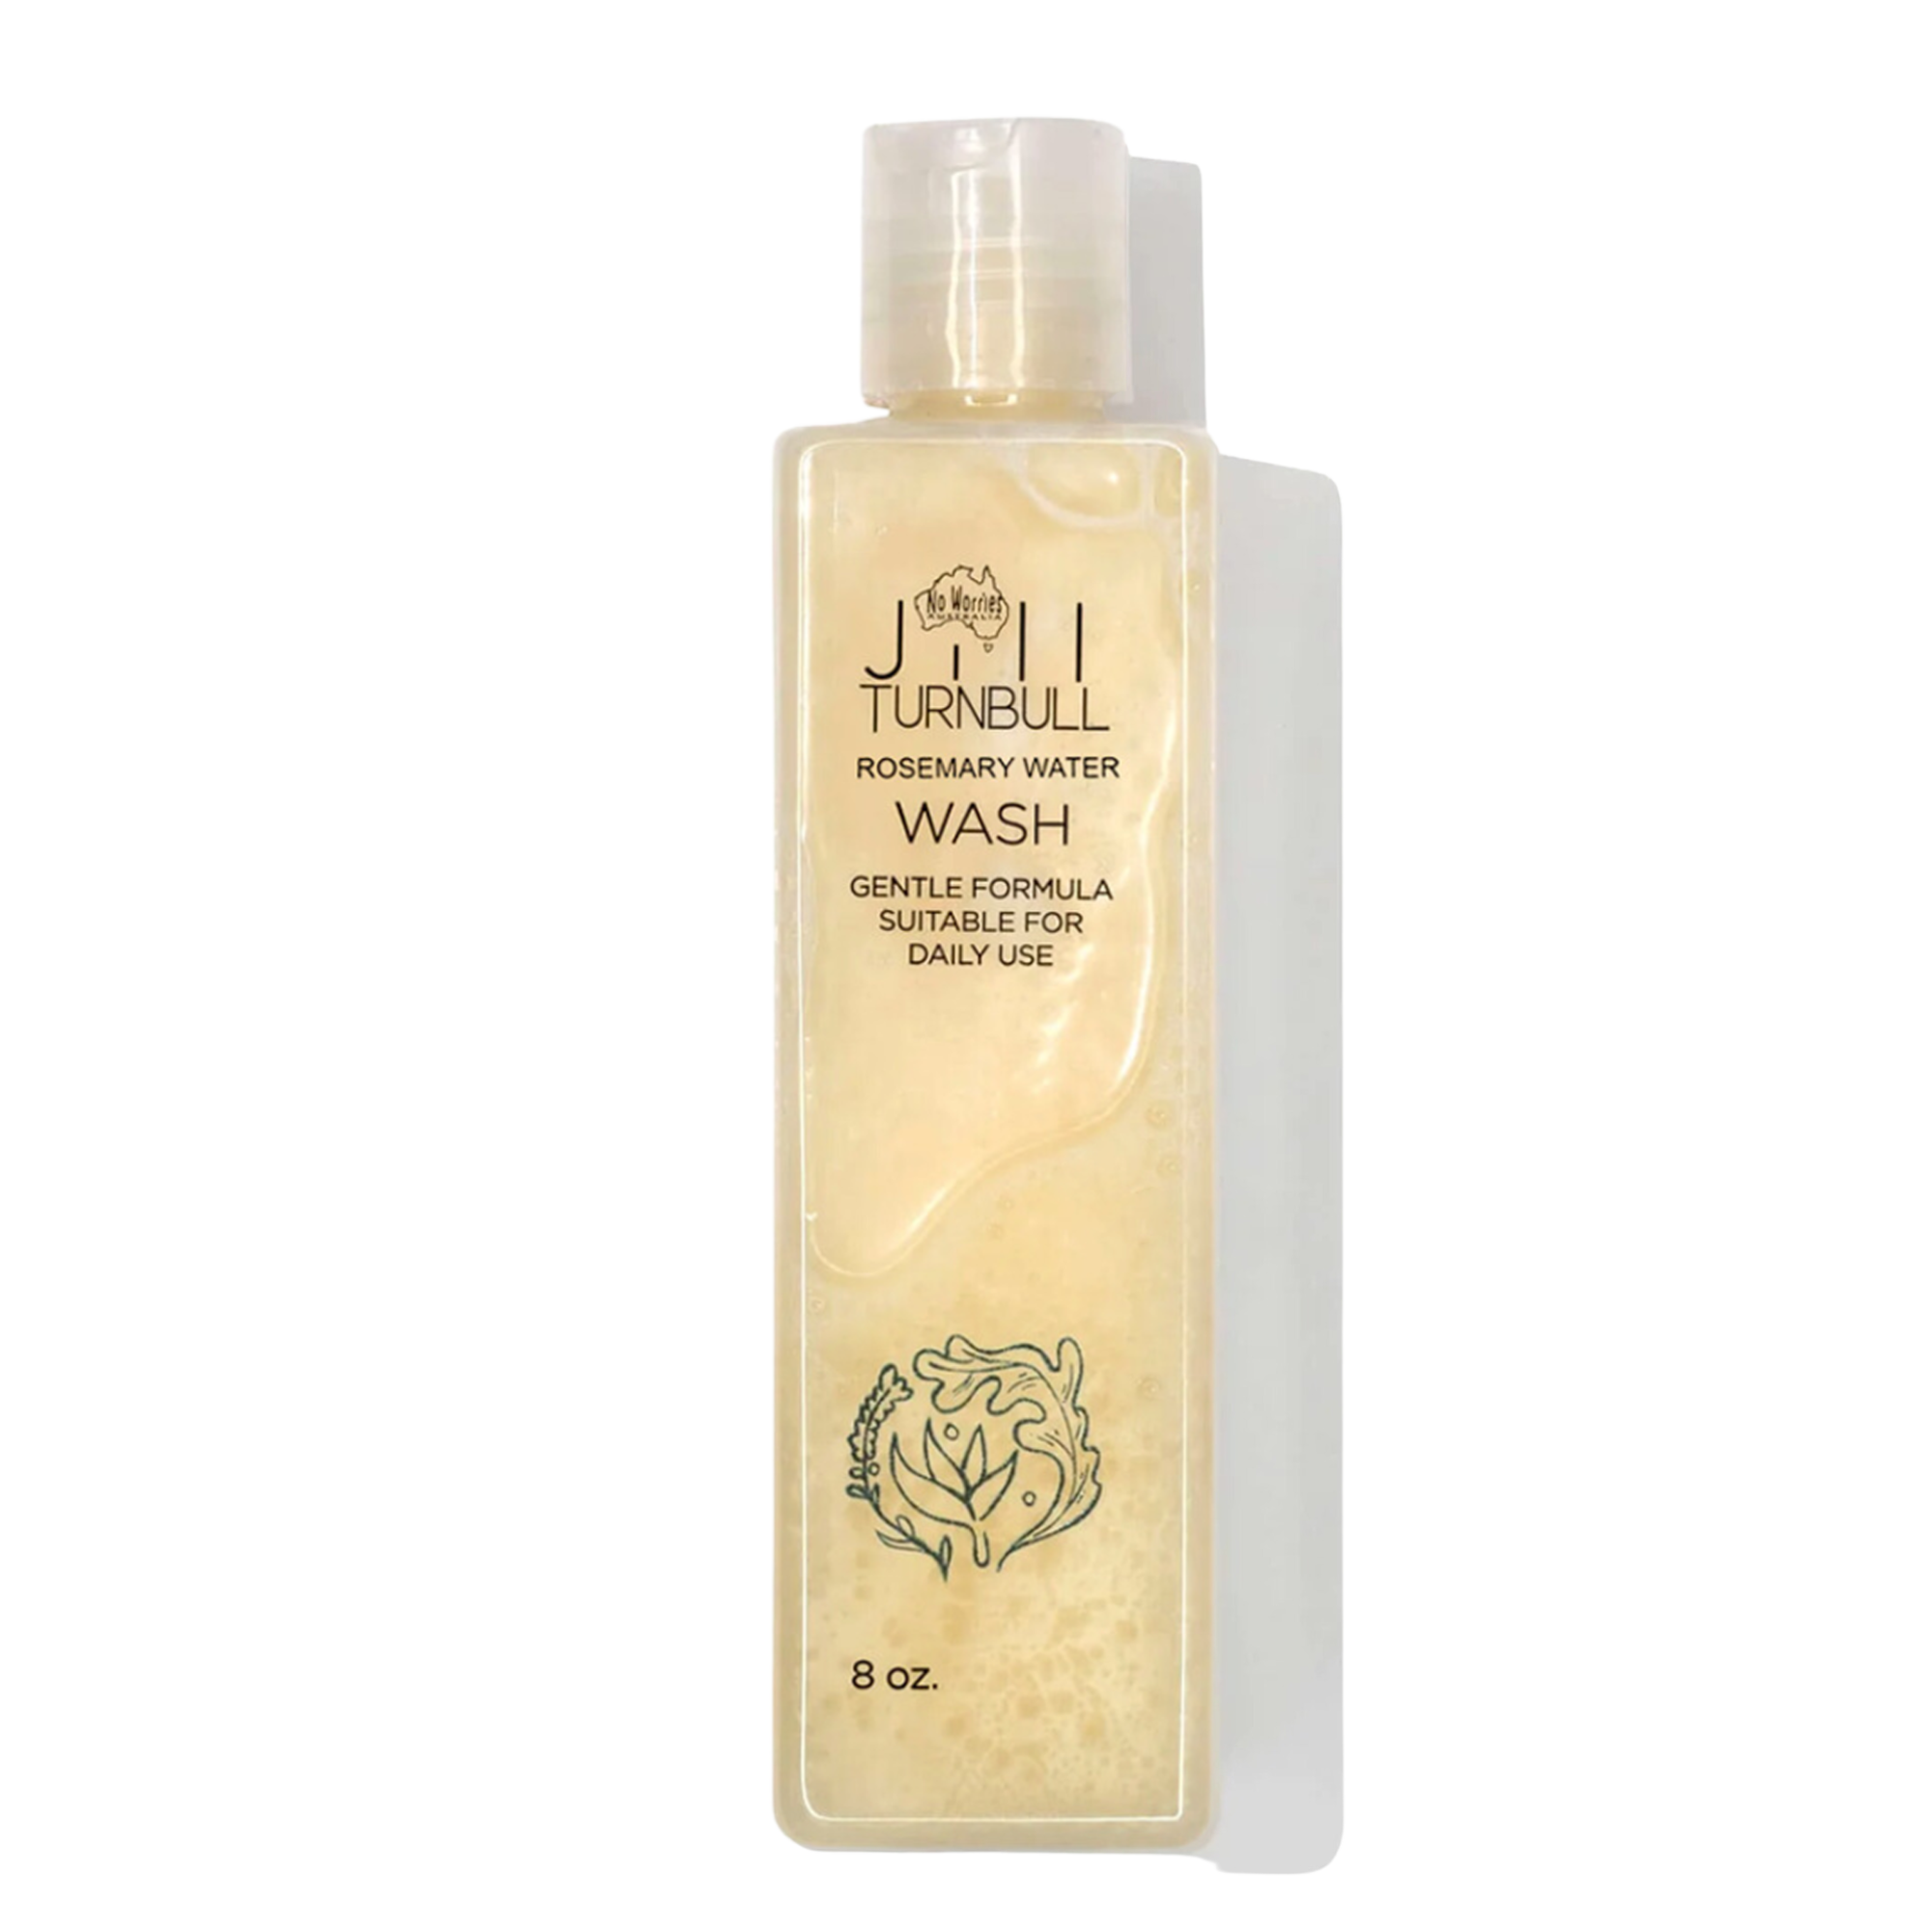 A light weight Rosemary Water Wash shampoo. Enriched with antioxidants, it breathes vitality into dry, brittle strands, promoting growth and a luxurious shine and fortifying against environmental harm. Exquisite for all hair types, delivering deep nourishment weightlessly.